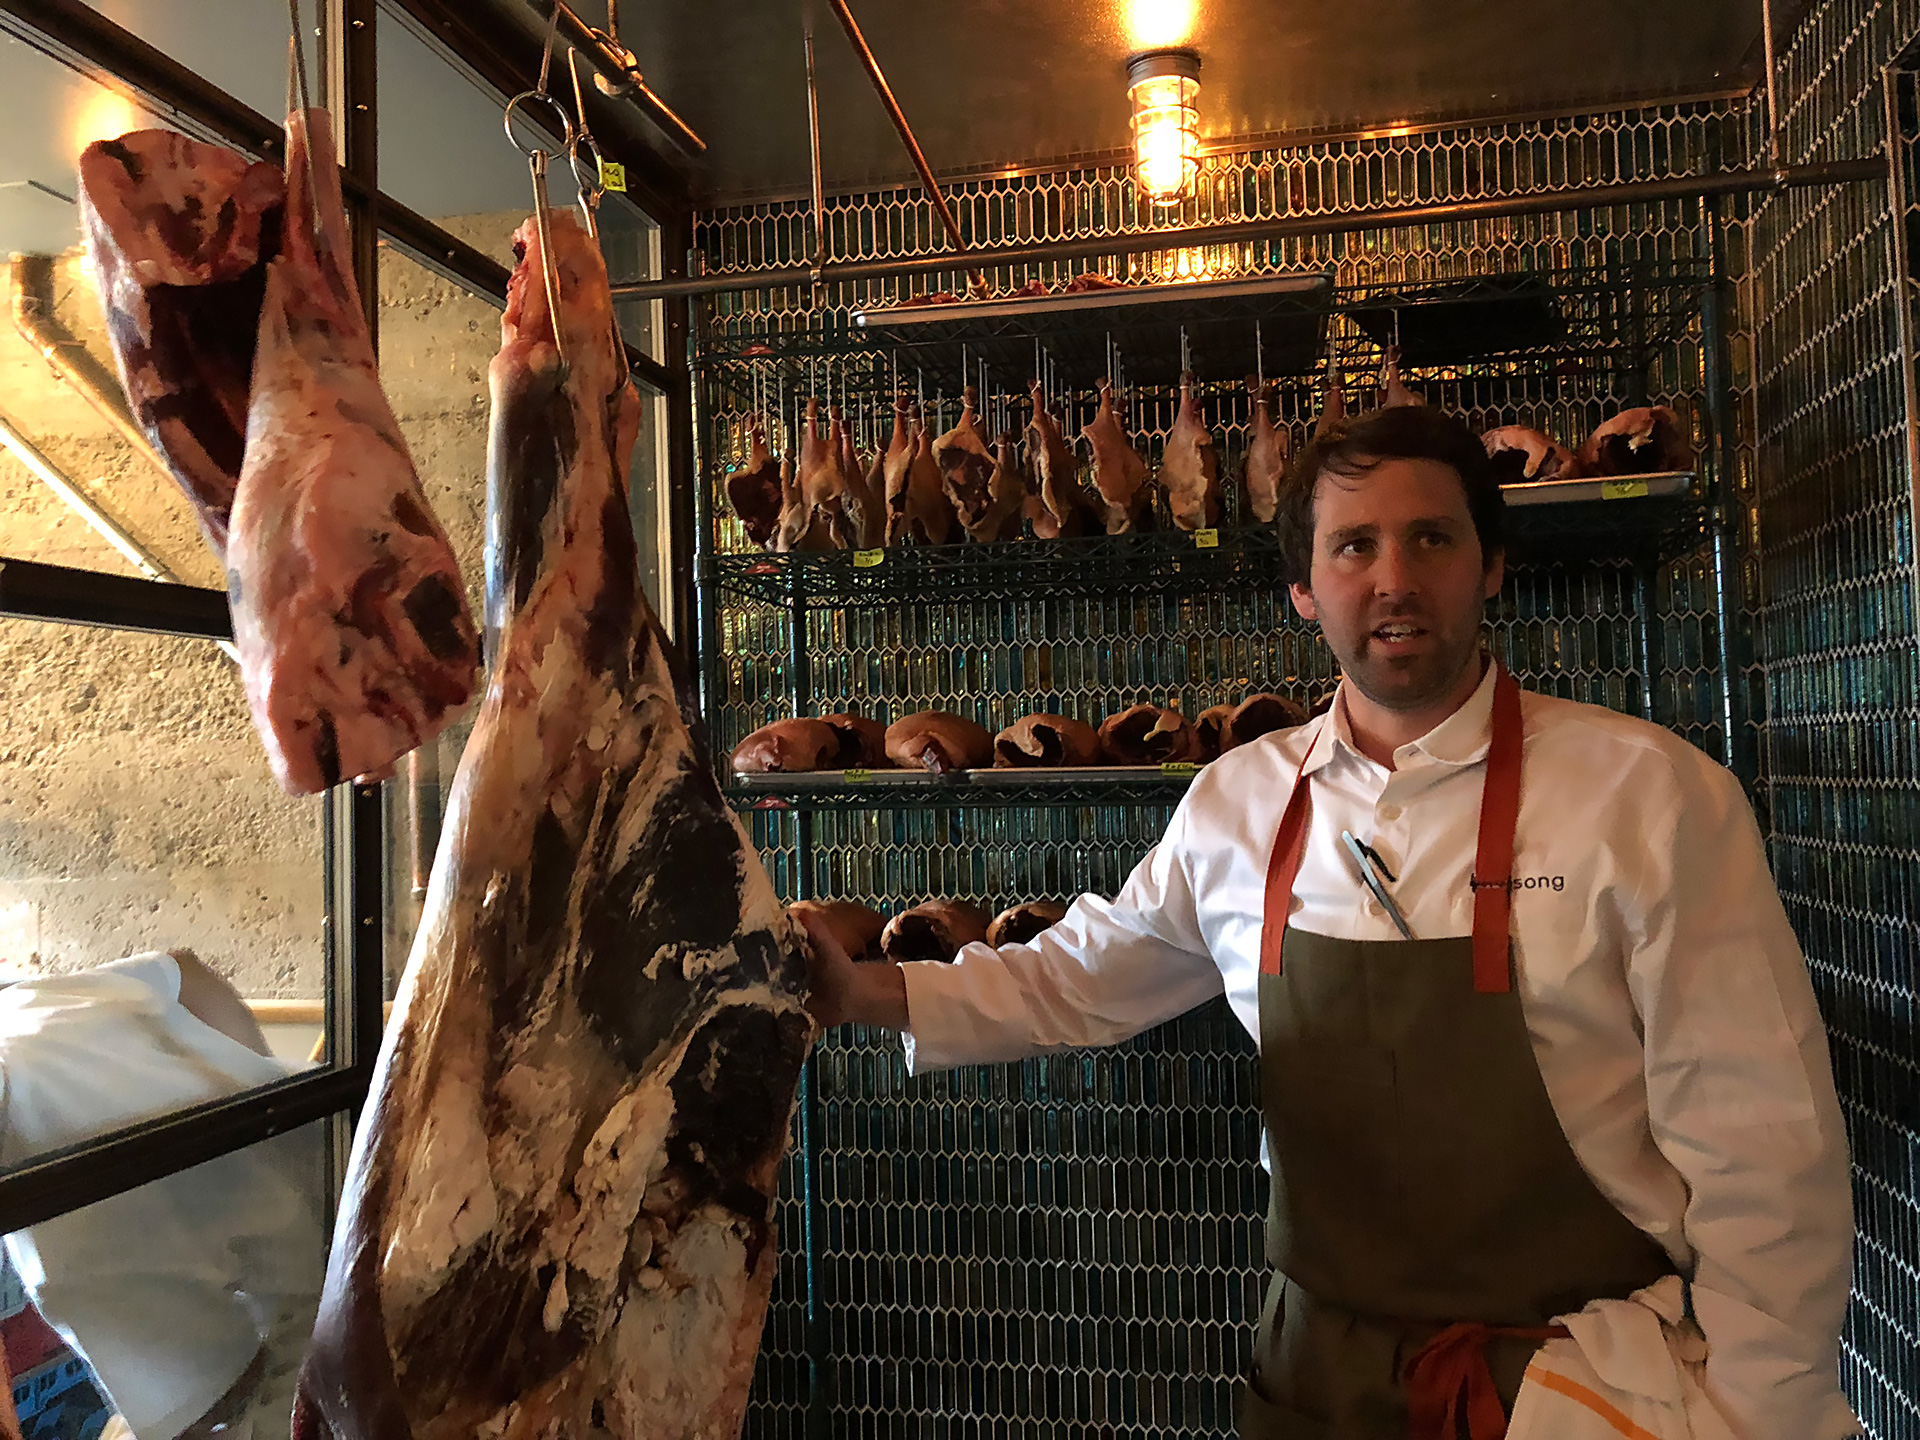 Chef Chris Bleidorn talks about the various cuts of meat in the glassed-in meat cooler.